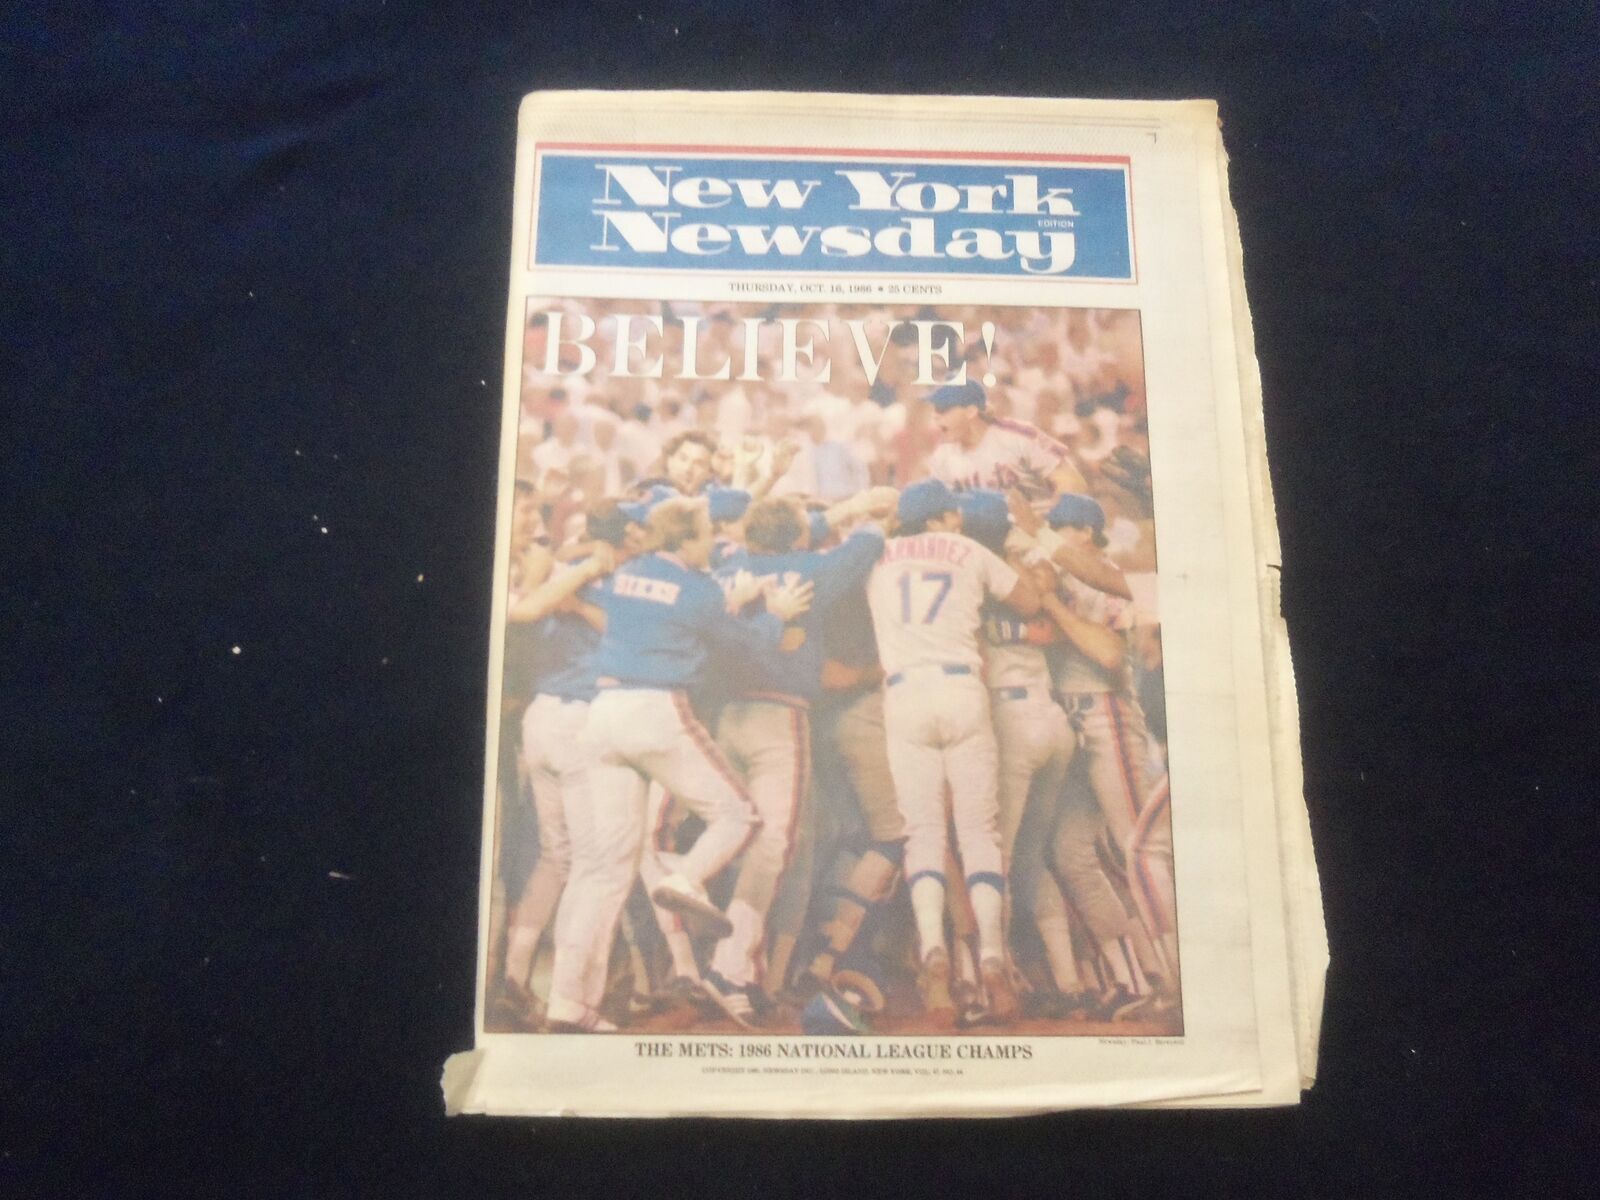 1986 OCTOBER 16 NEW YORK NEWSDAY NEWSPAPER - N.Y METS NL CHAMPIONS - NP 6087